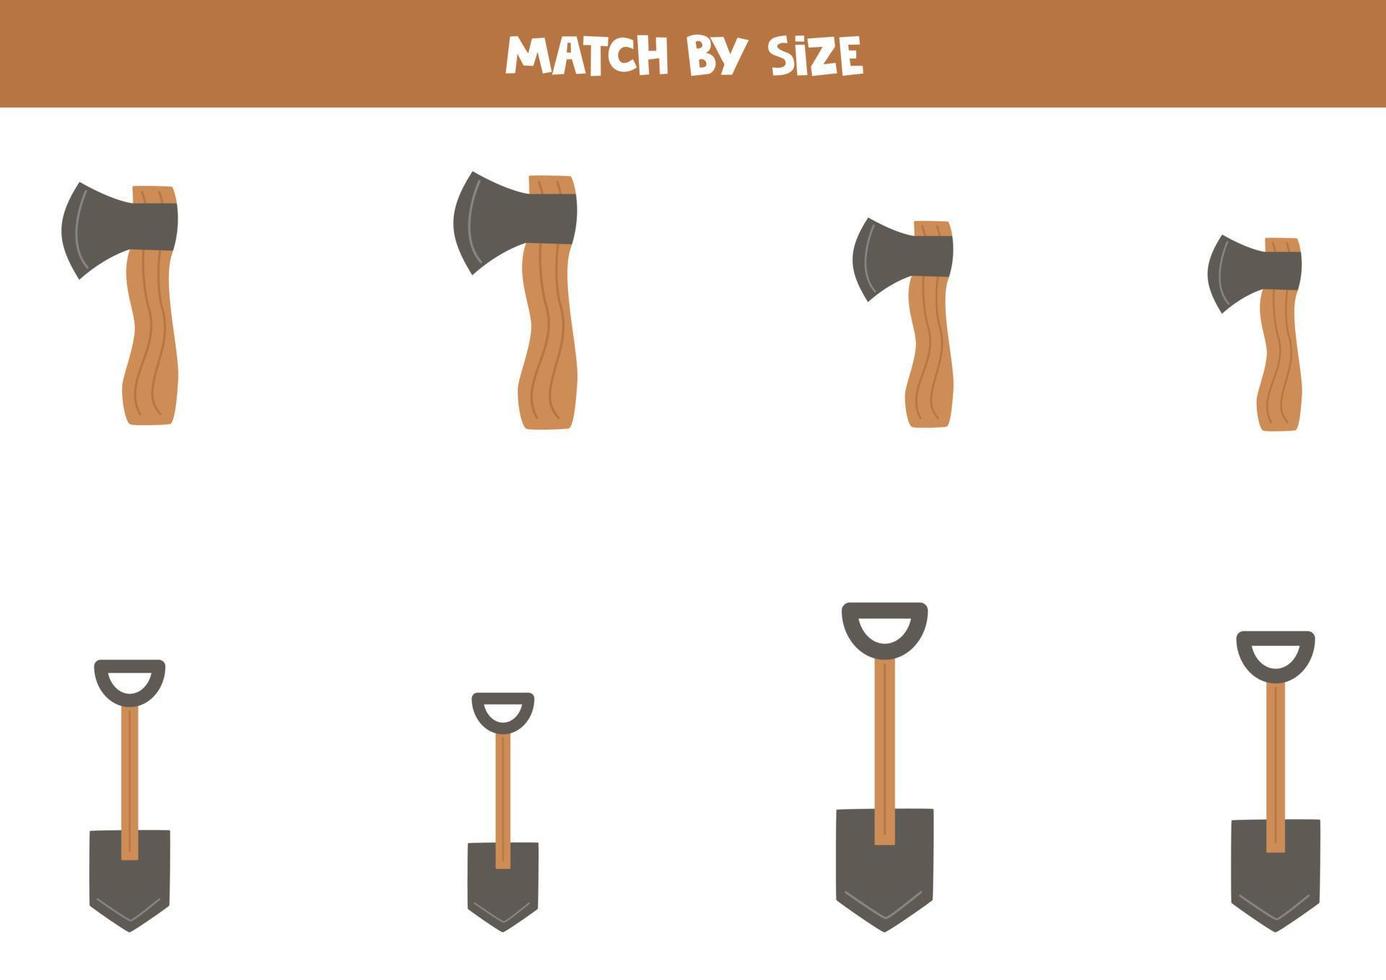 Matching game for preschool kids. Match axes and shovels by size. vector